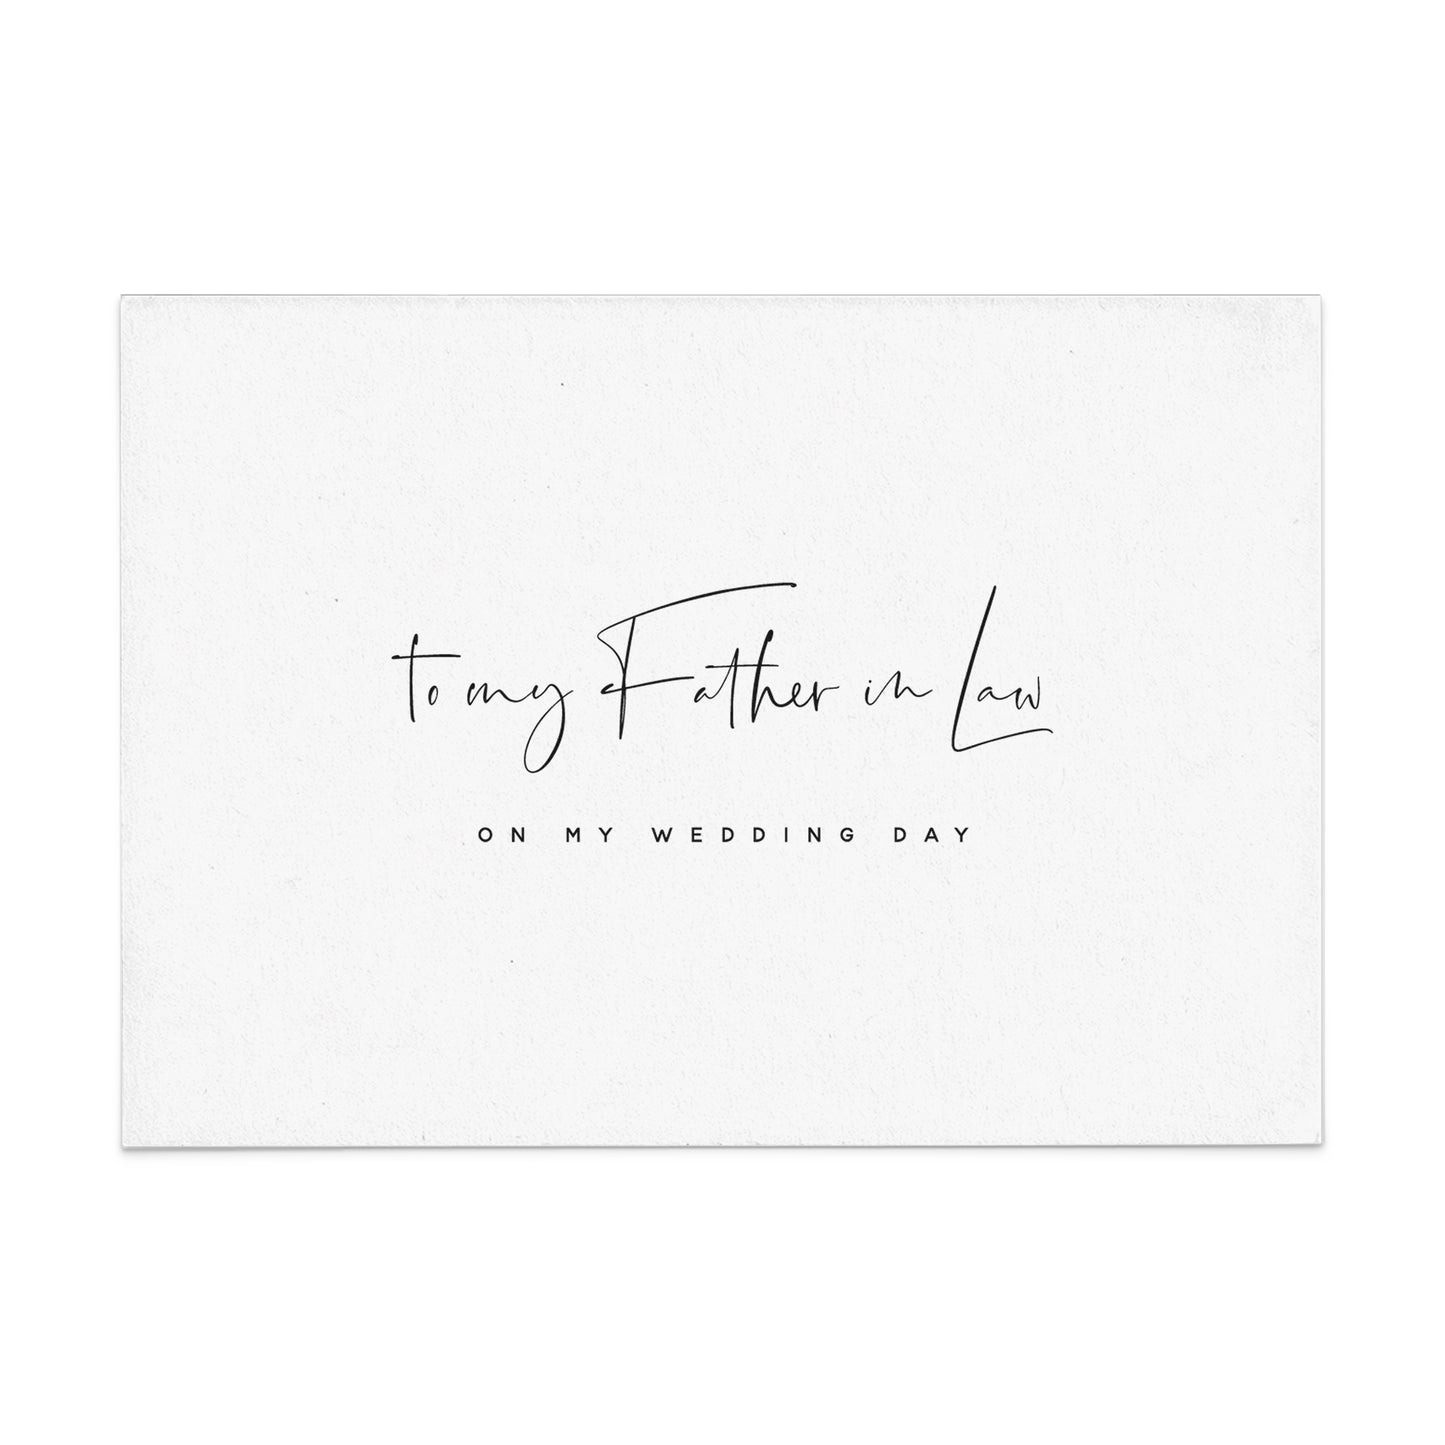 to my father-in-law on my wedding day card